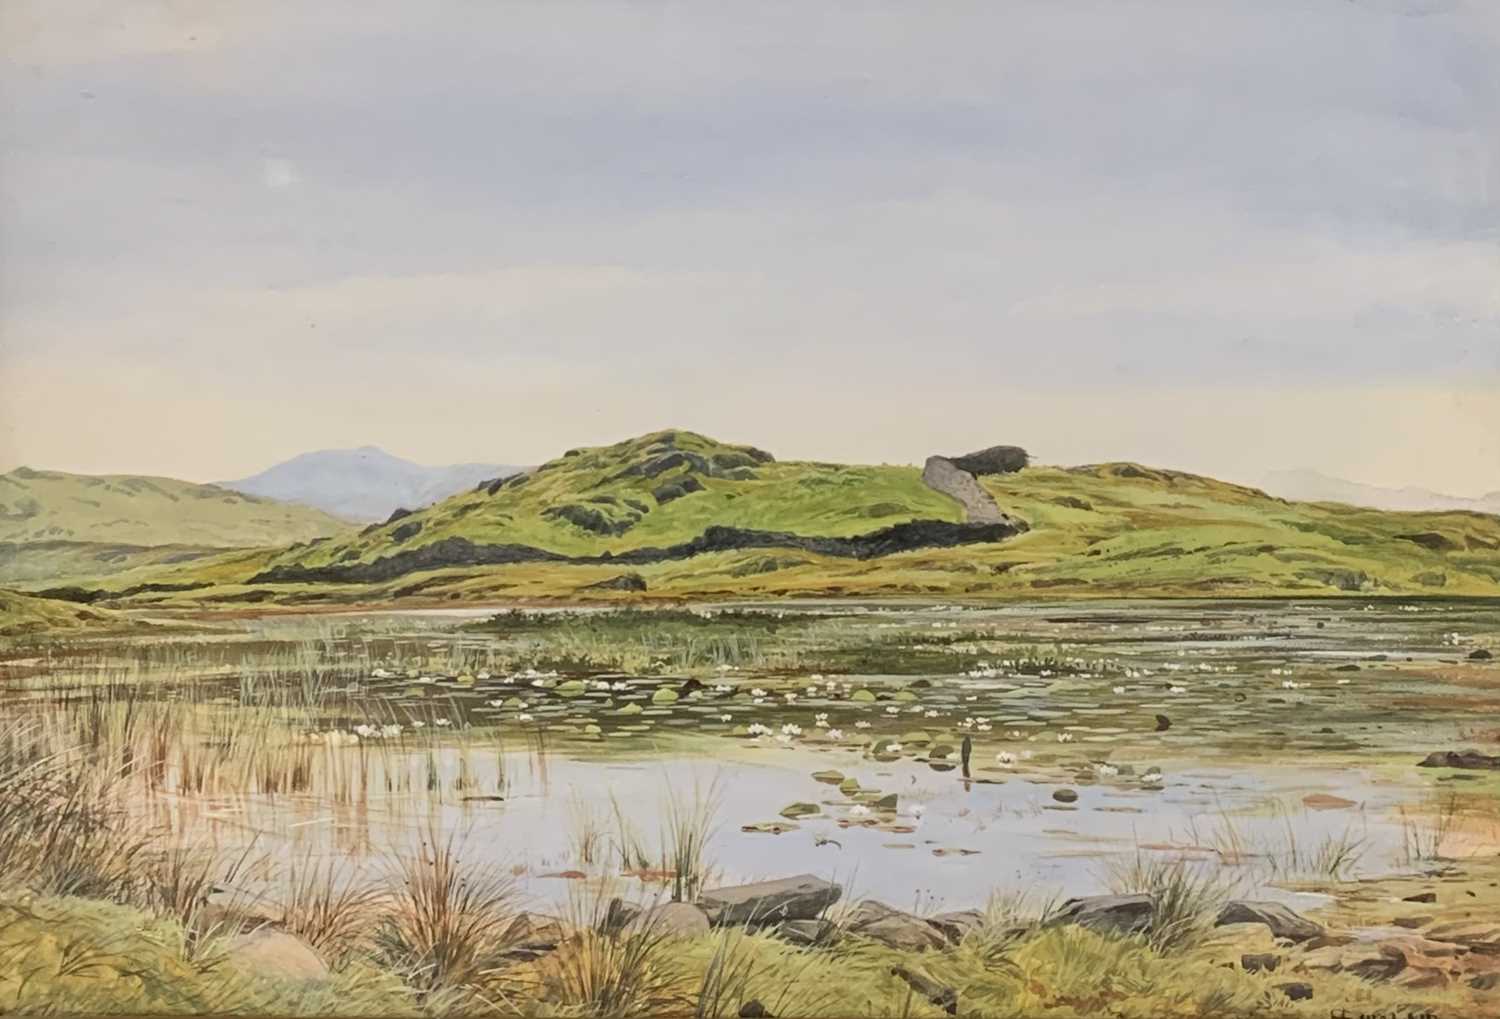 JOHN SINCLAIR (active 1871-1922) watercolour - of rolling hills and lily pads on a lake to the